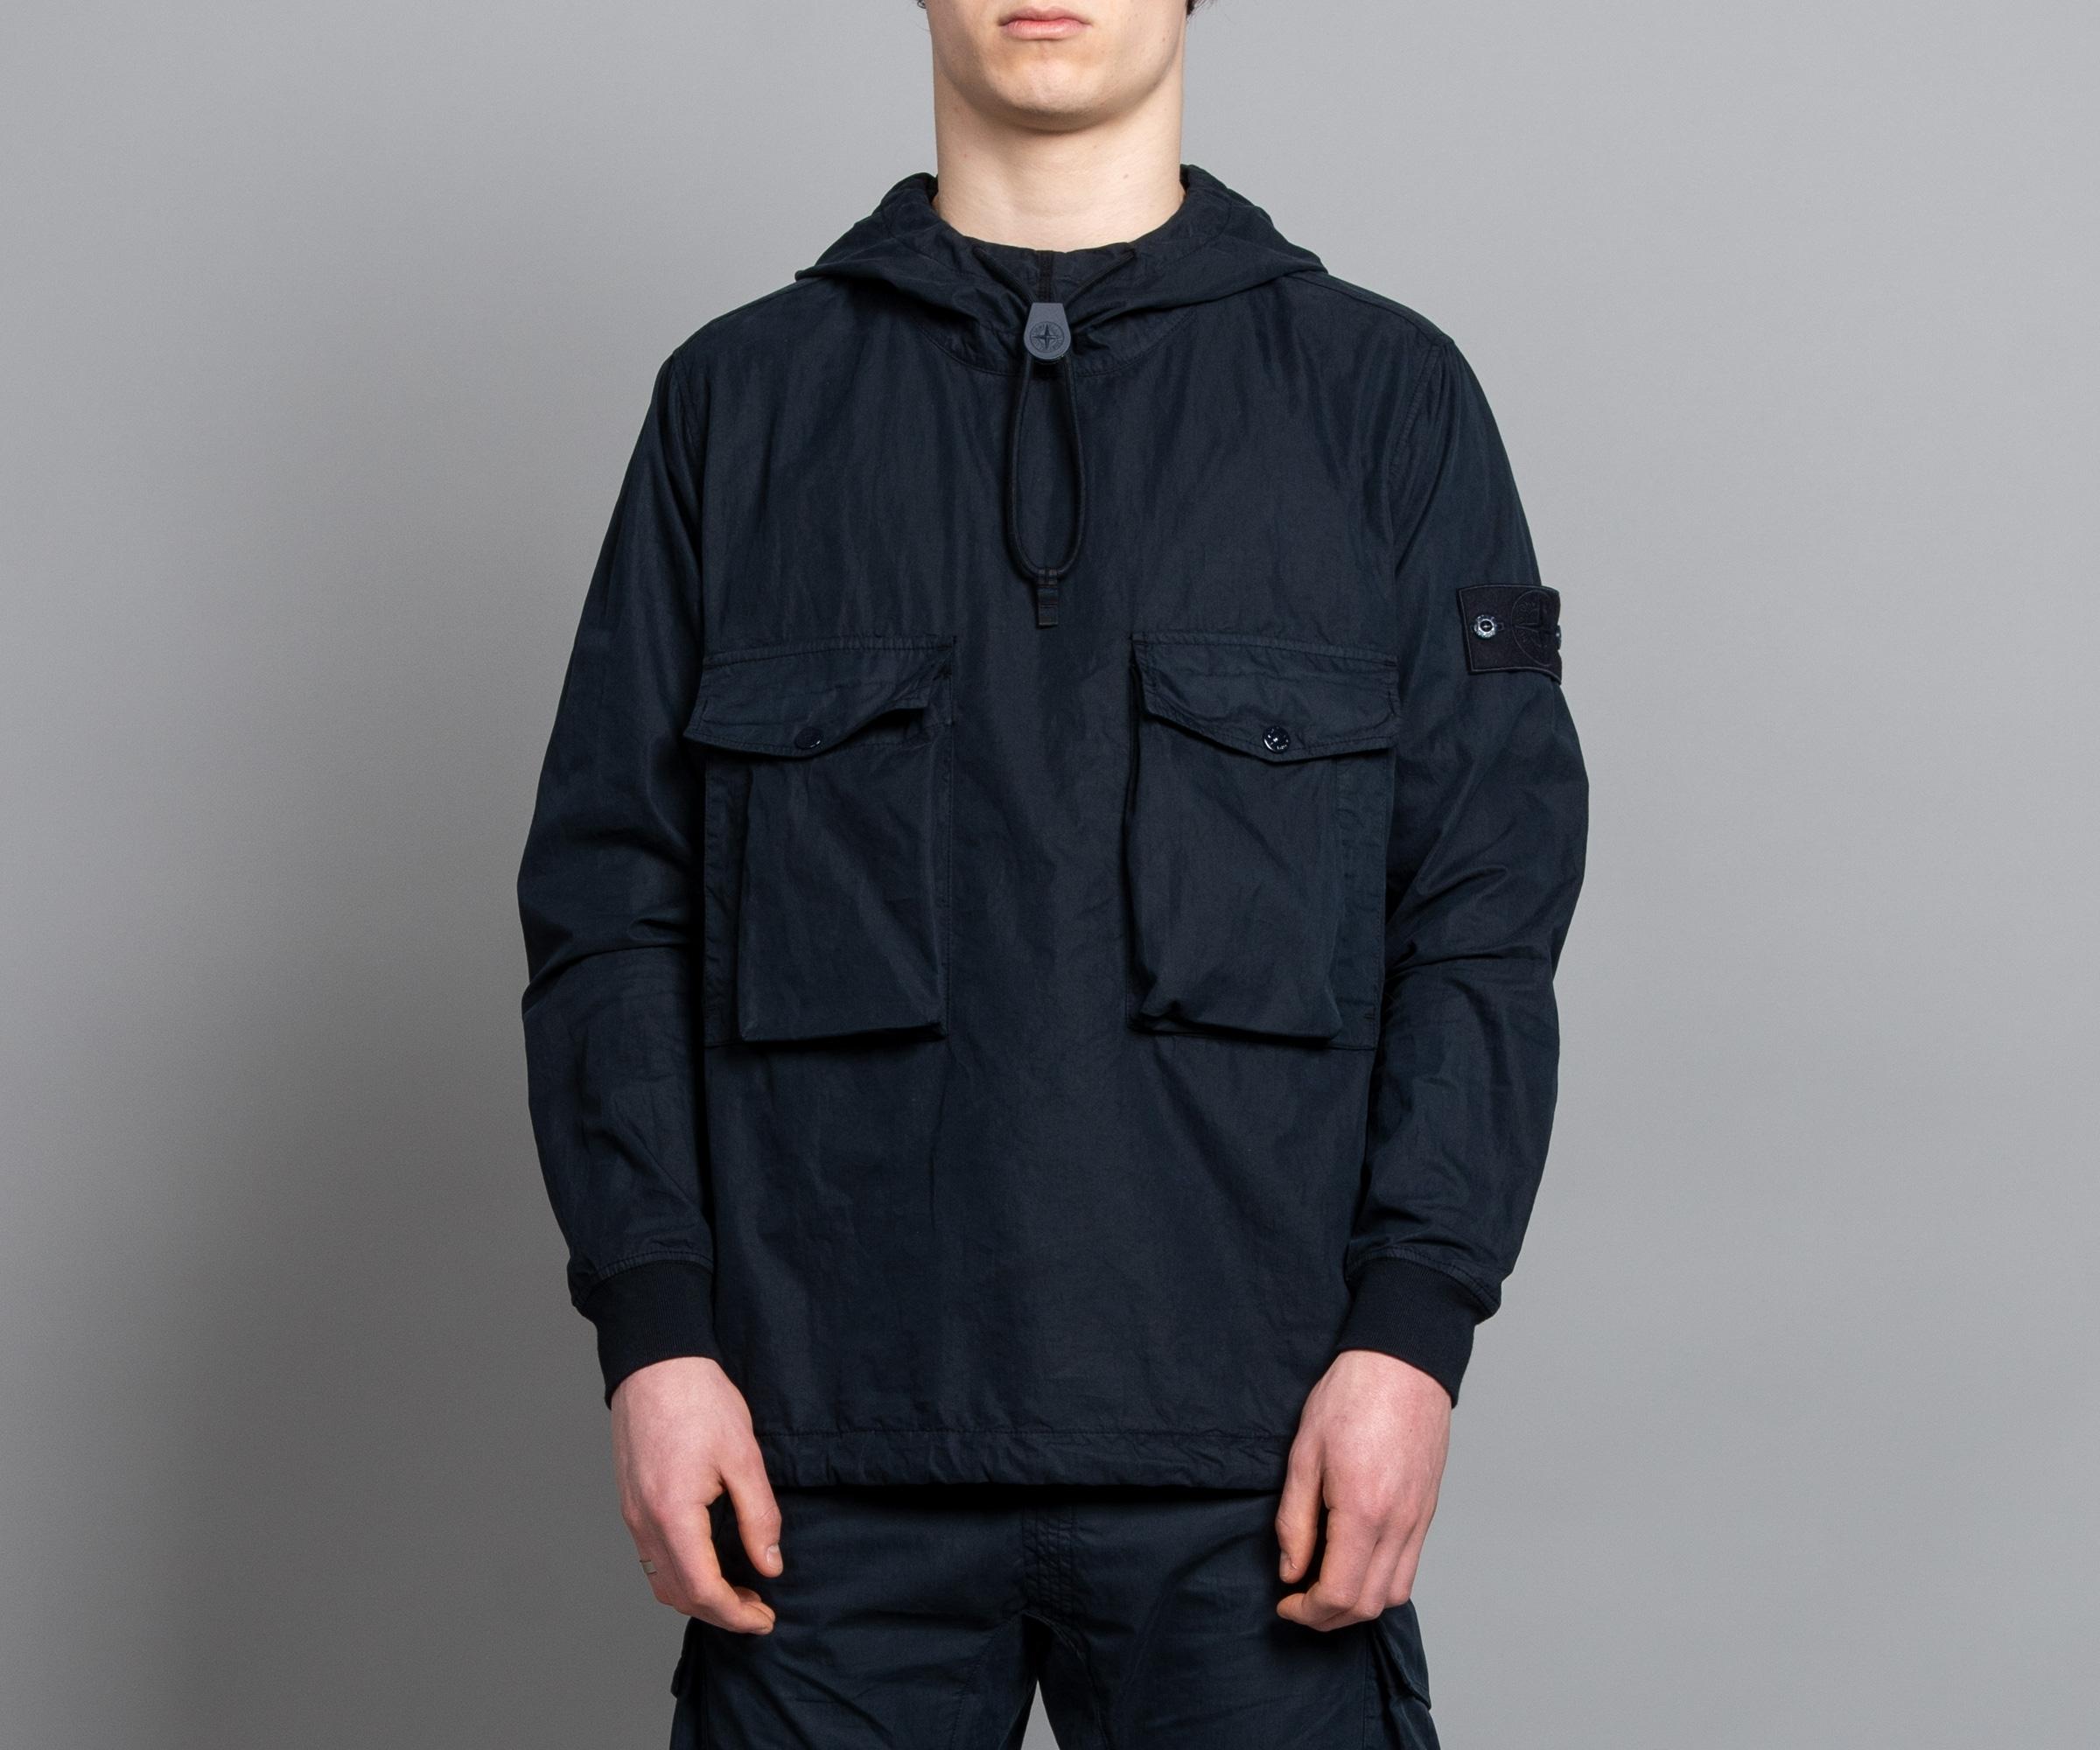 Stone Island Cotton Ghost Collection Smock Navy in Blue for Men - Lyst